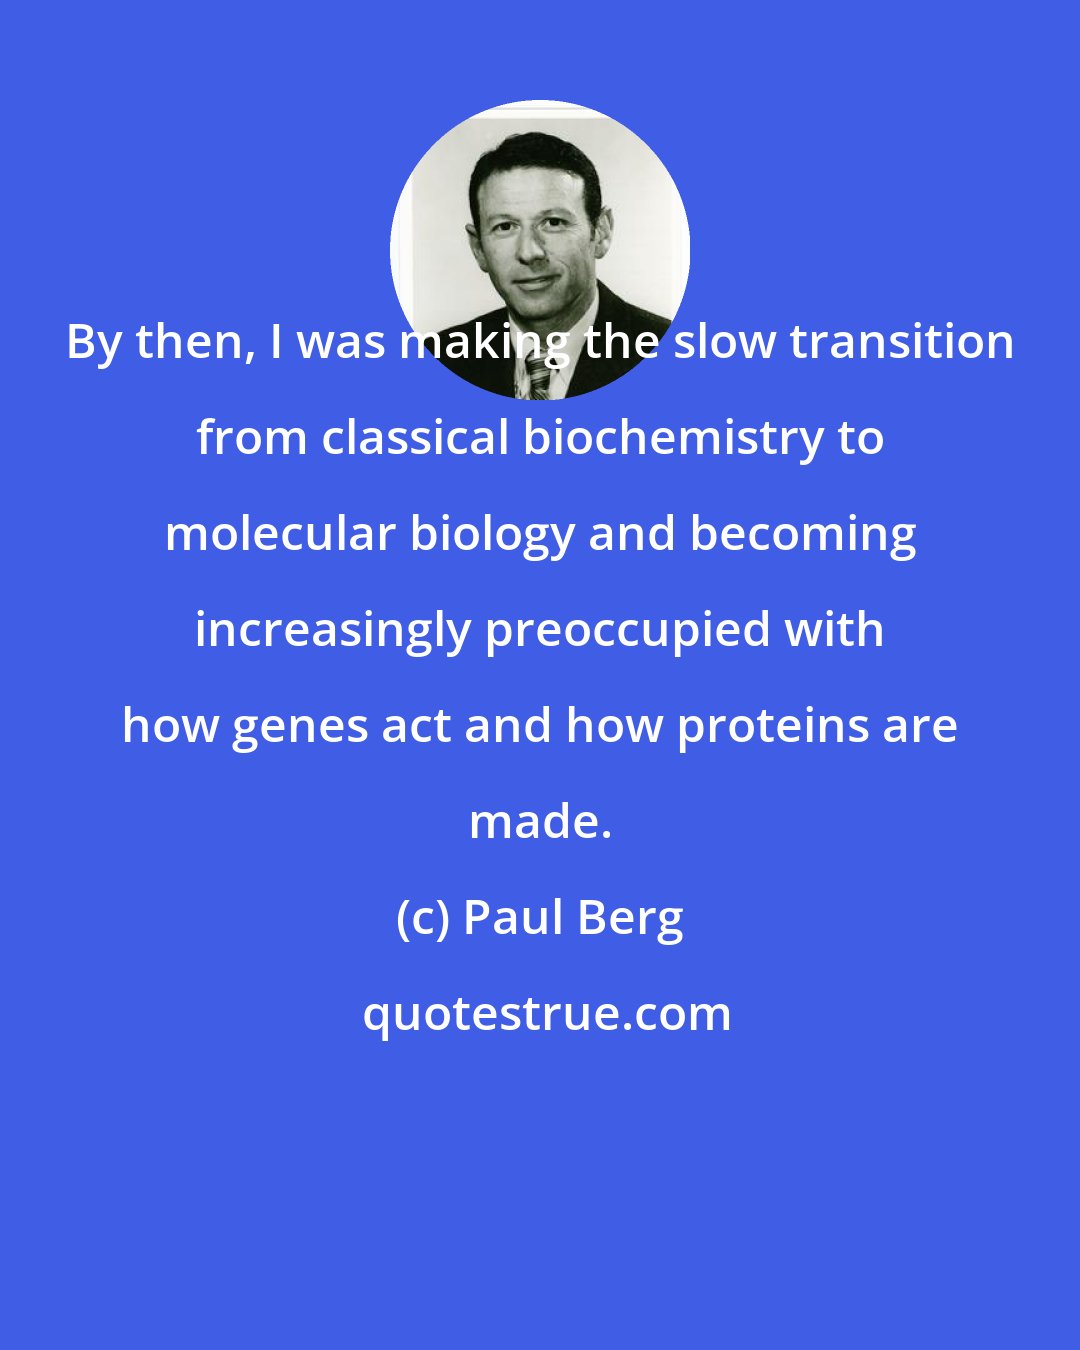 Paul Berg: By then, I was making the slow transition from classical biochemistry to molecular biology and becoming increasingly preoccupied with how genes act and how proteins are made.